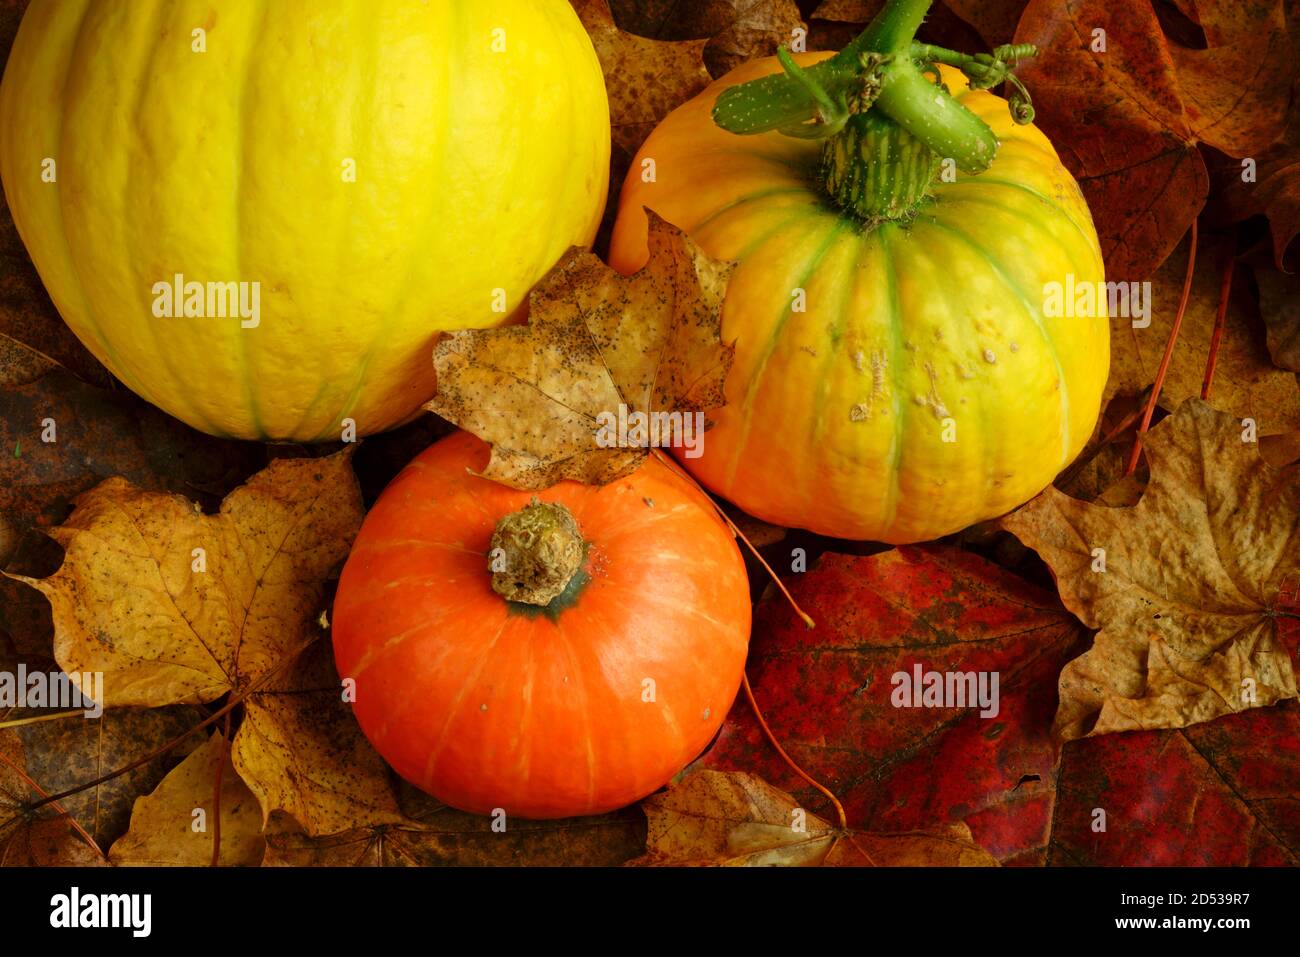 Orange and yellow squashes with autumn leaves. Stock Photo